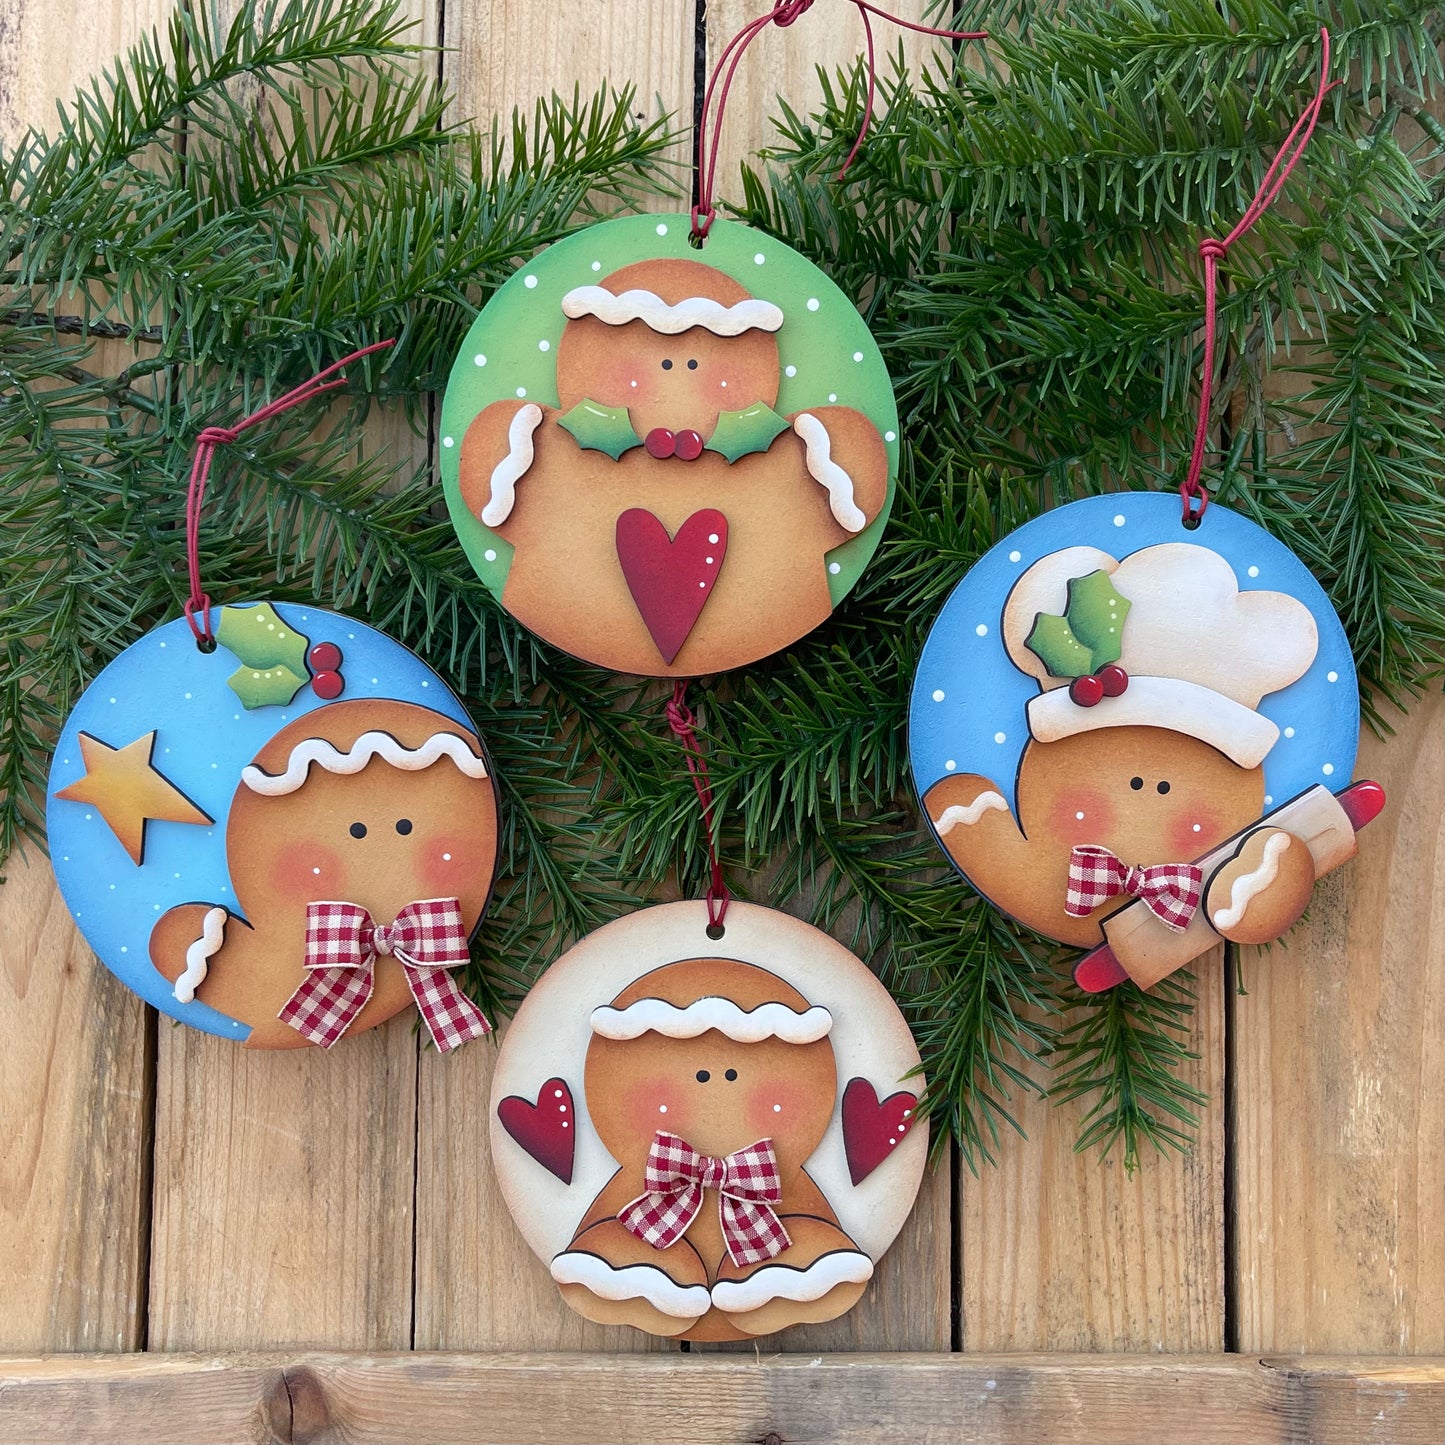 Sweet gingerbread ornament Out of the Wood